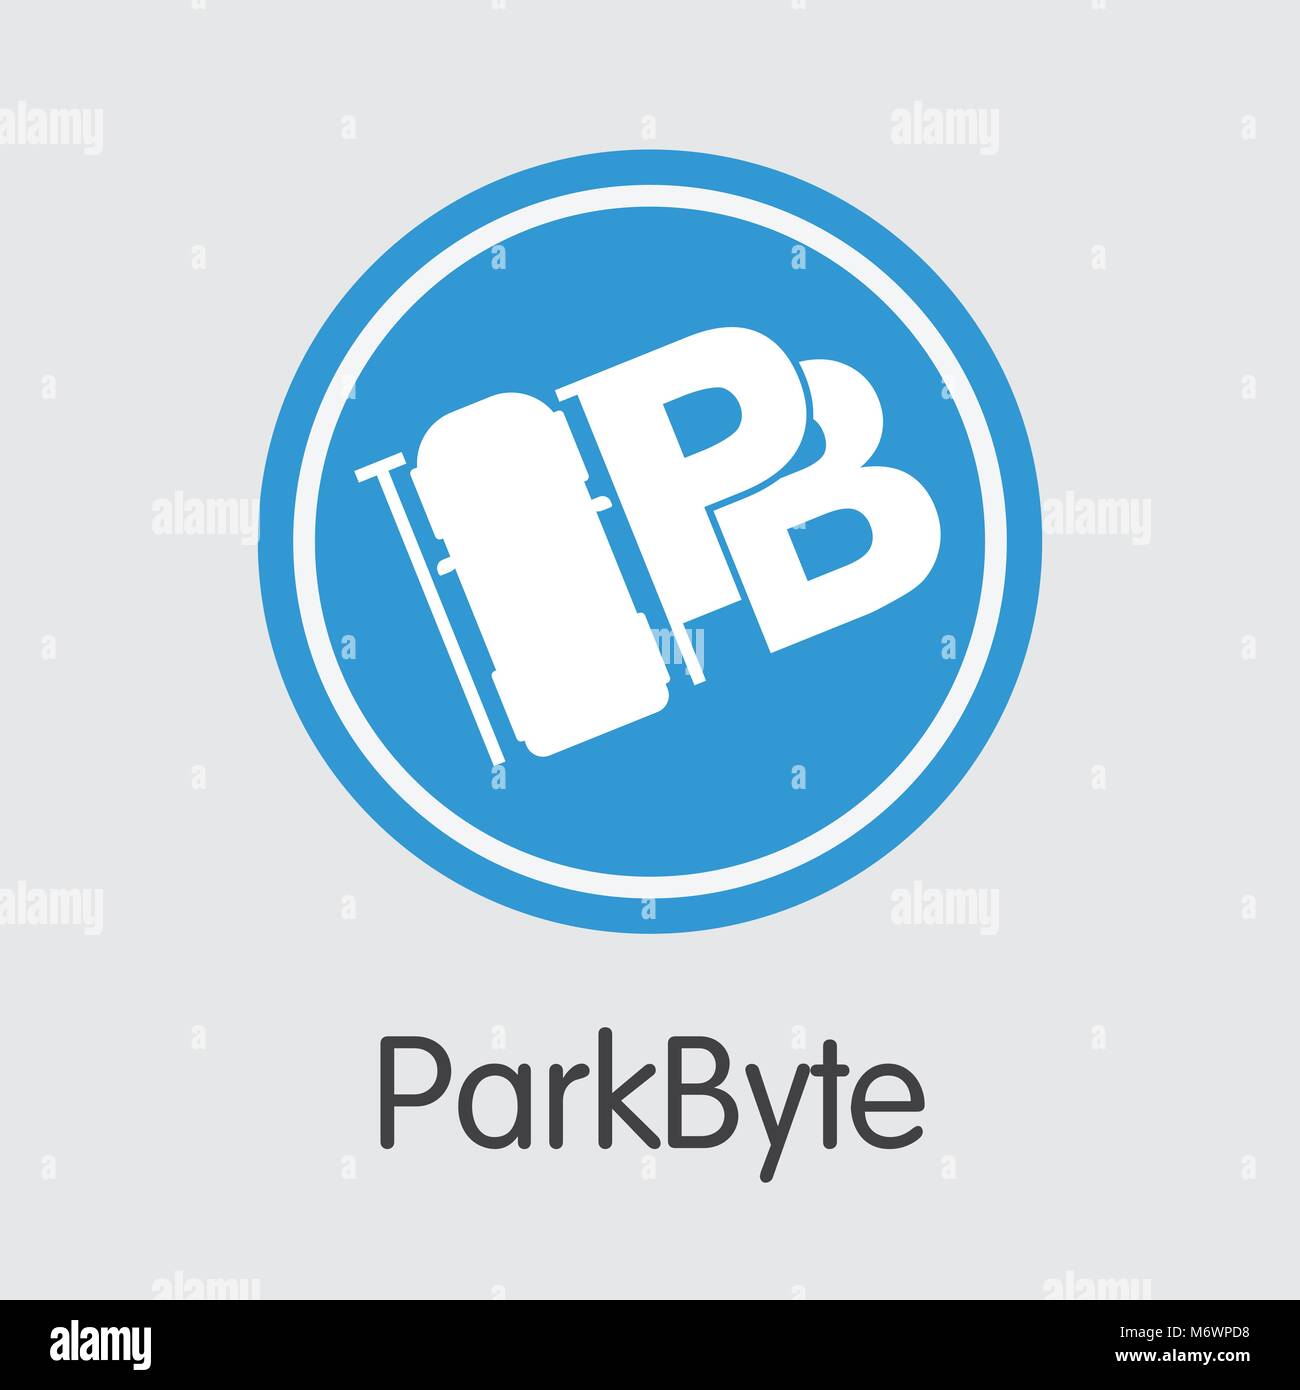 Parkbyte Cryptographic Currency - Vector Symbol. Stock Vector